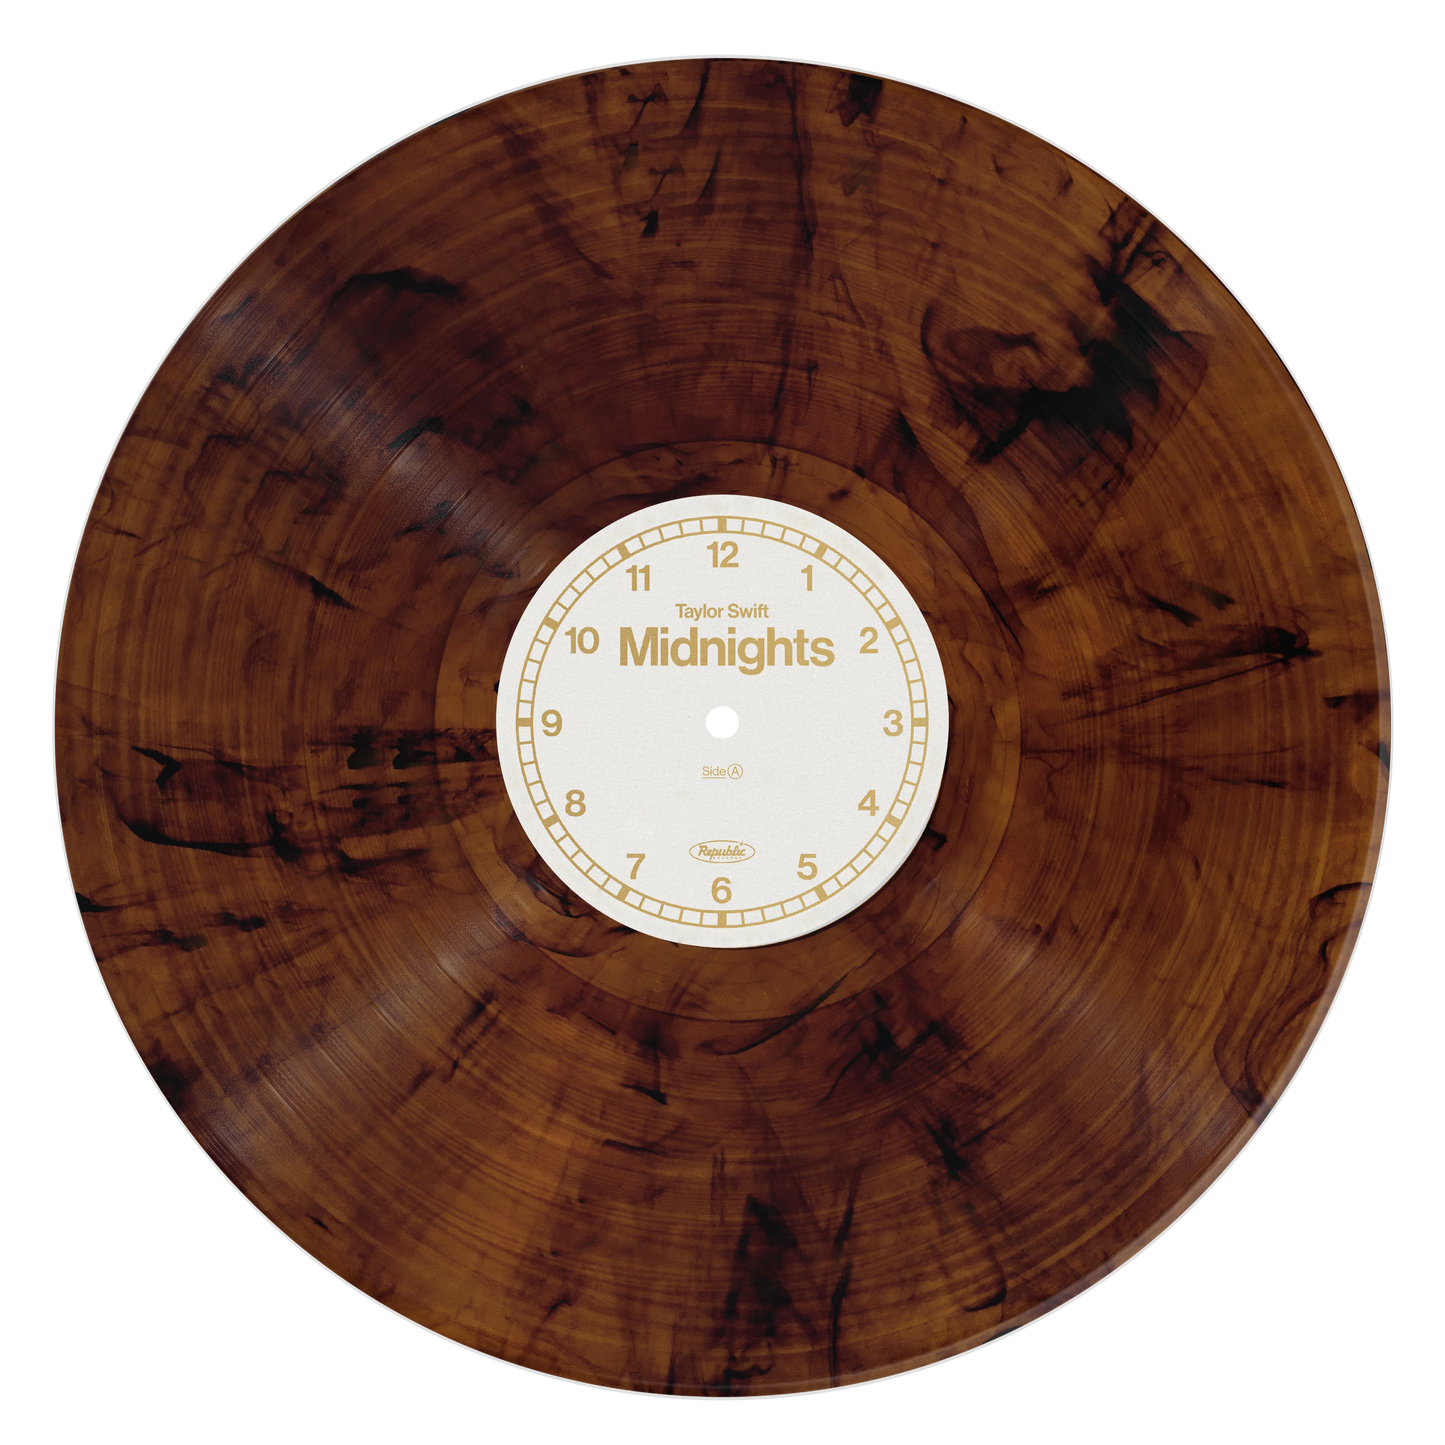 Taylor Swift Midnights Album On Mahogany Brown Marbled Version Limited Edition Vinyl LP Record Variant Disc Only